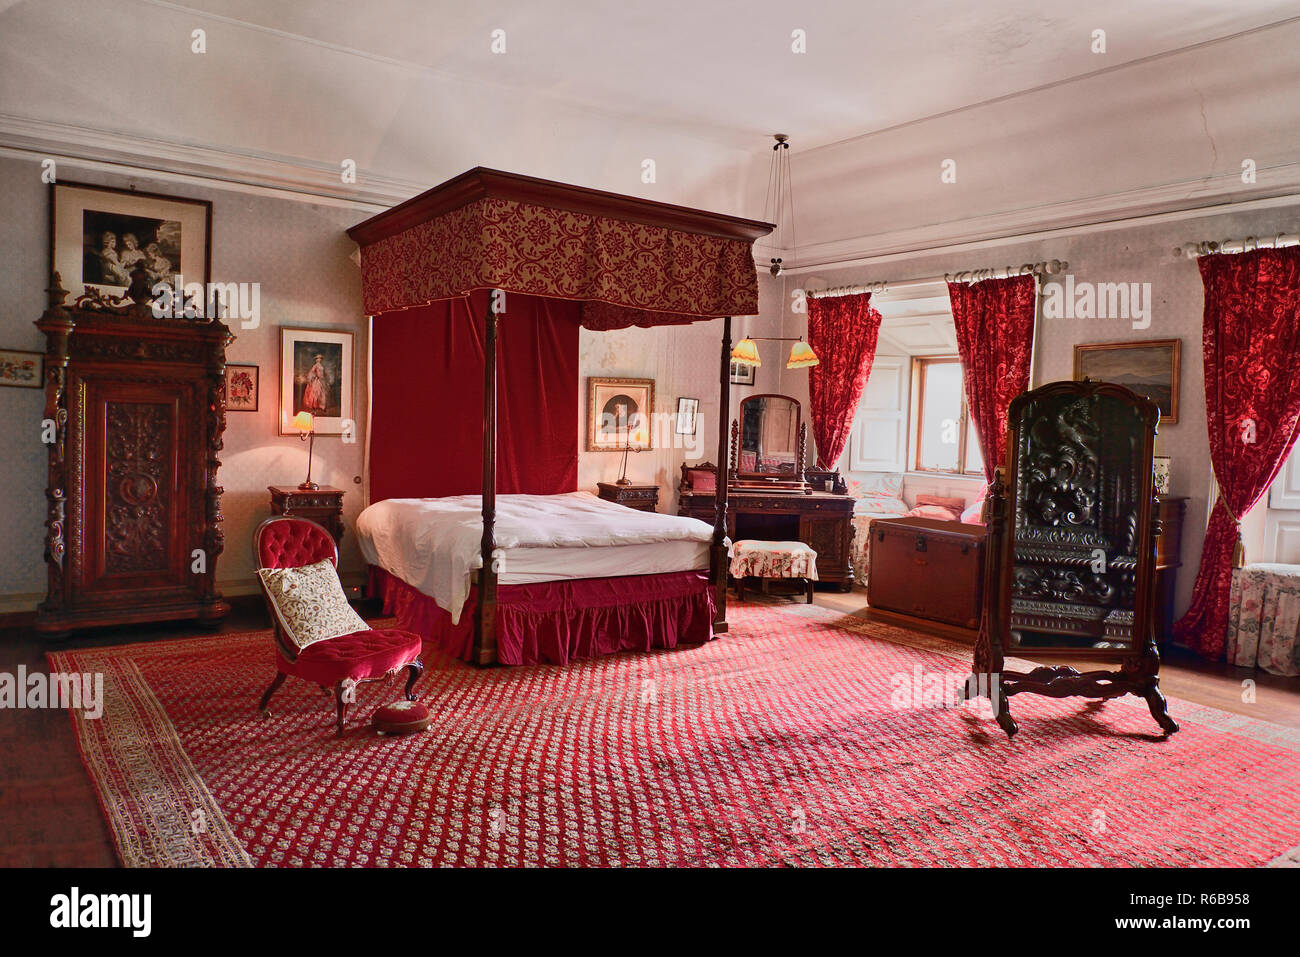 Ireland, County Mayo, Westport House, 17th century former ancestral home of the Browne family, the Red Bedroom. Stock Photo